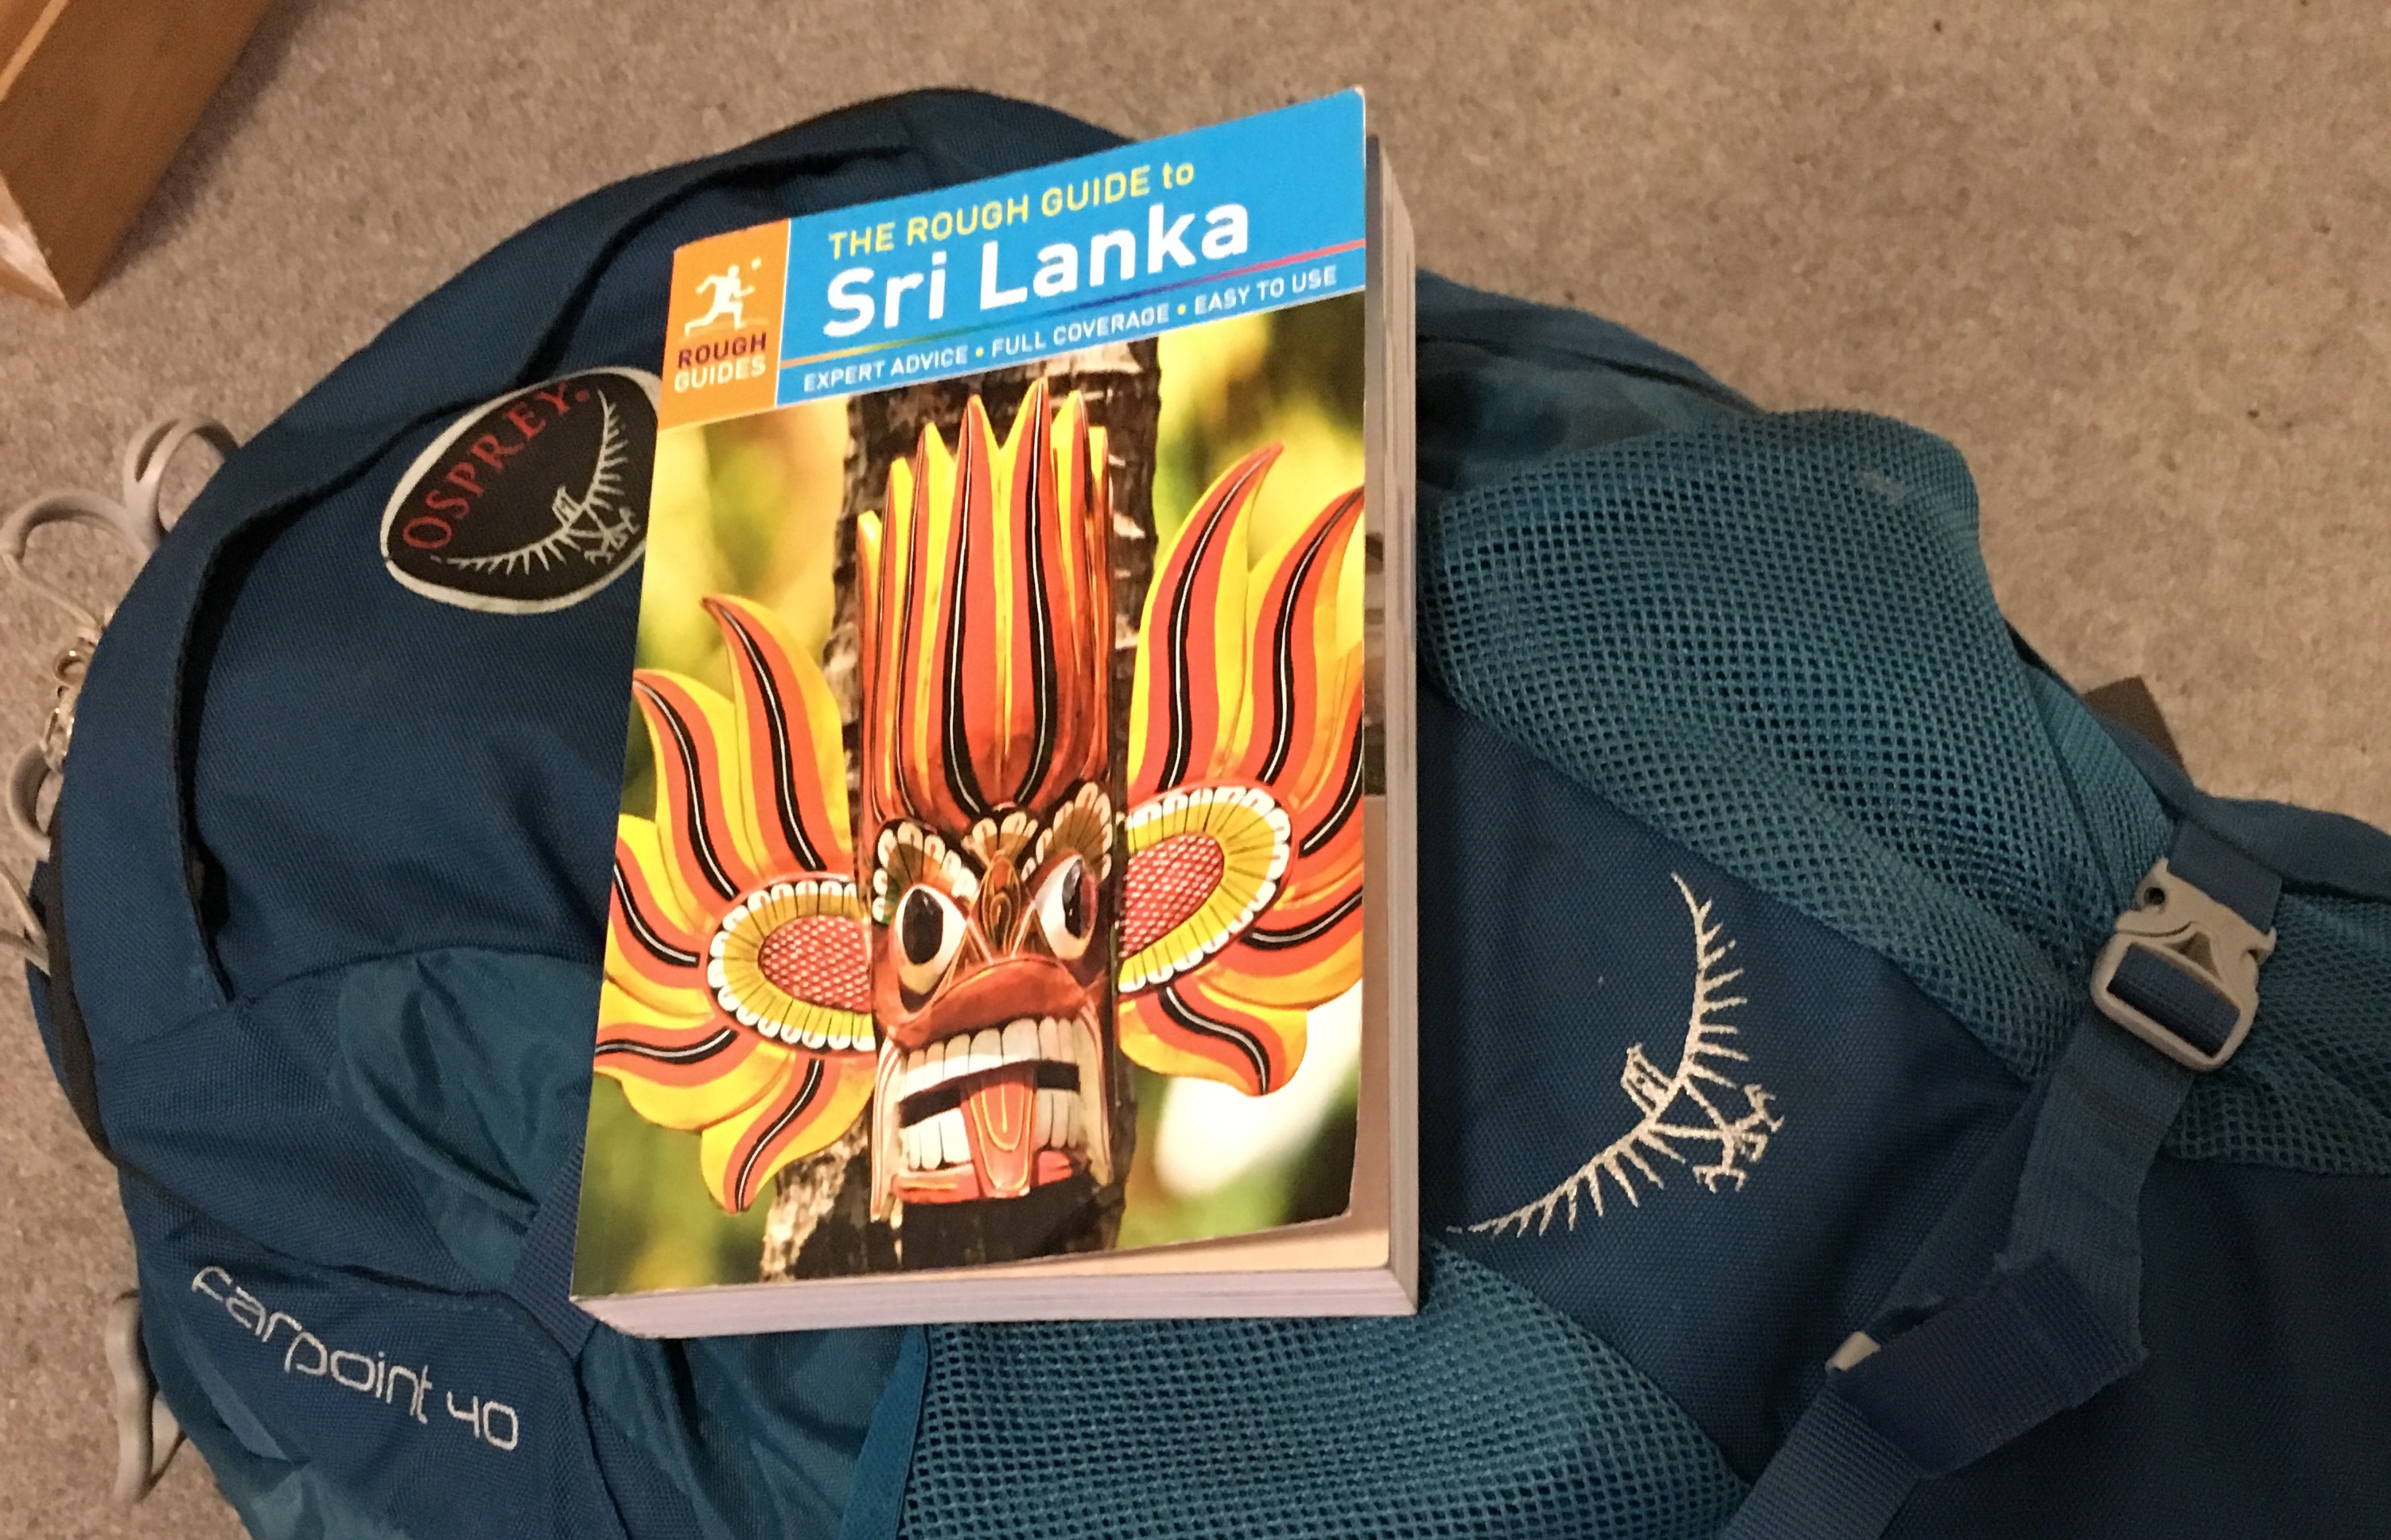 The Rough Guide to Sri Lanka book on top of a blue Osprey Farpoint 40 backpack